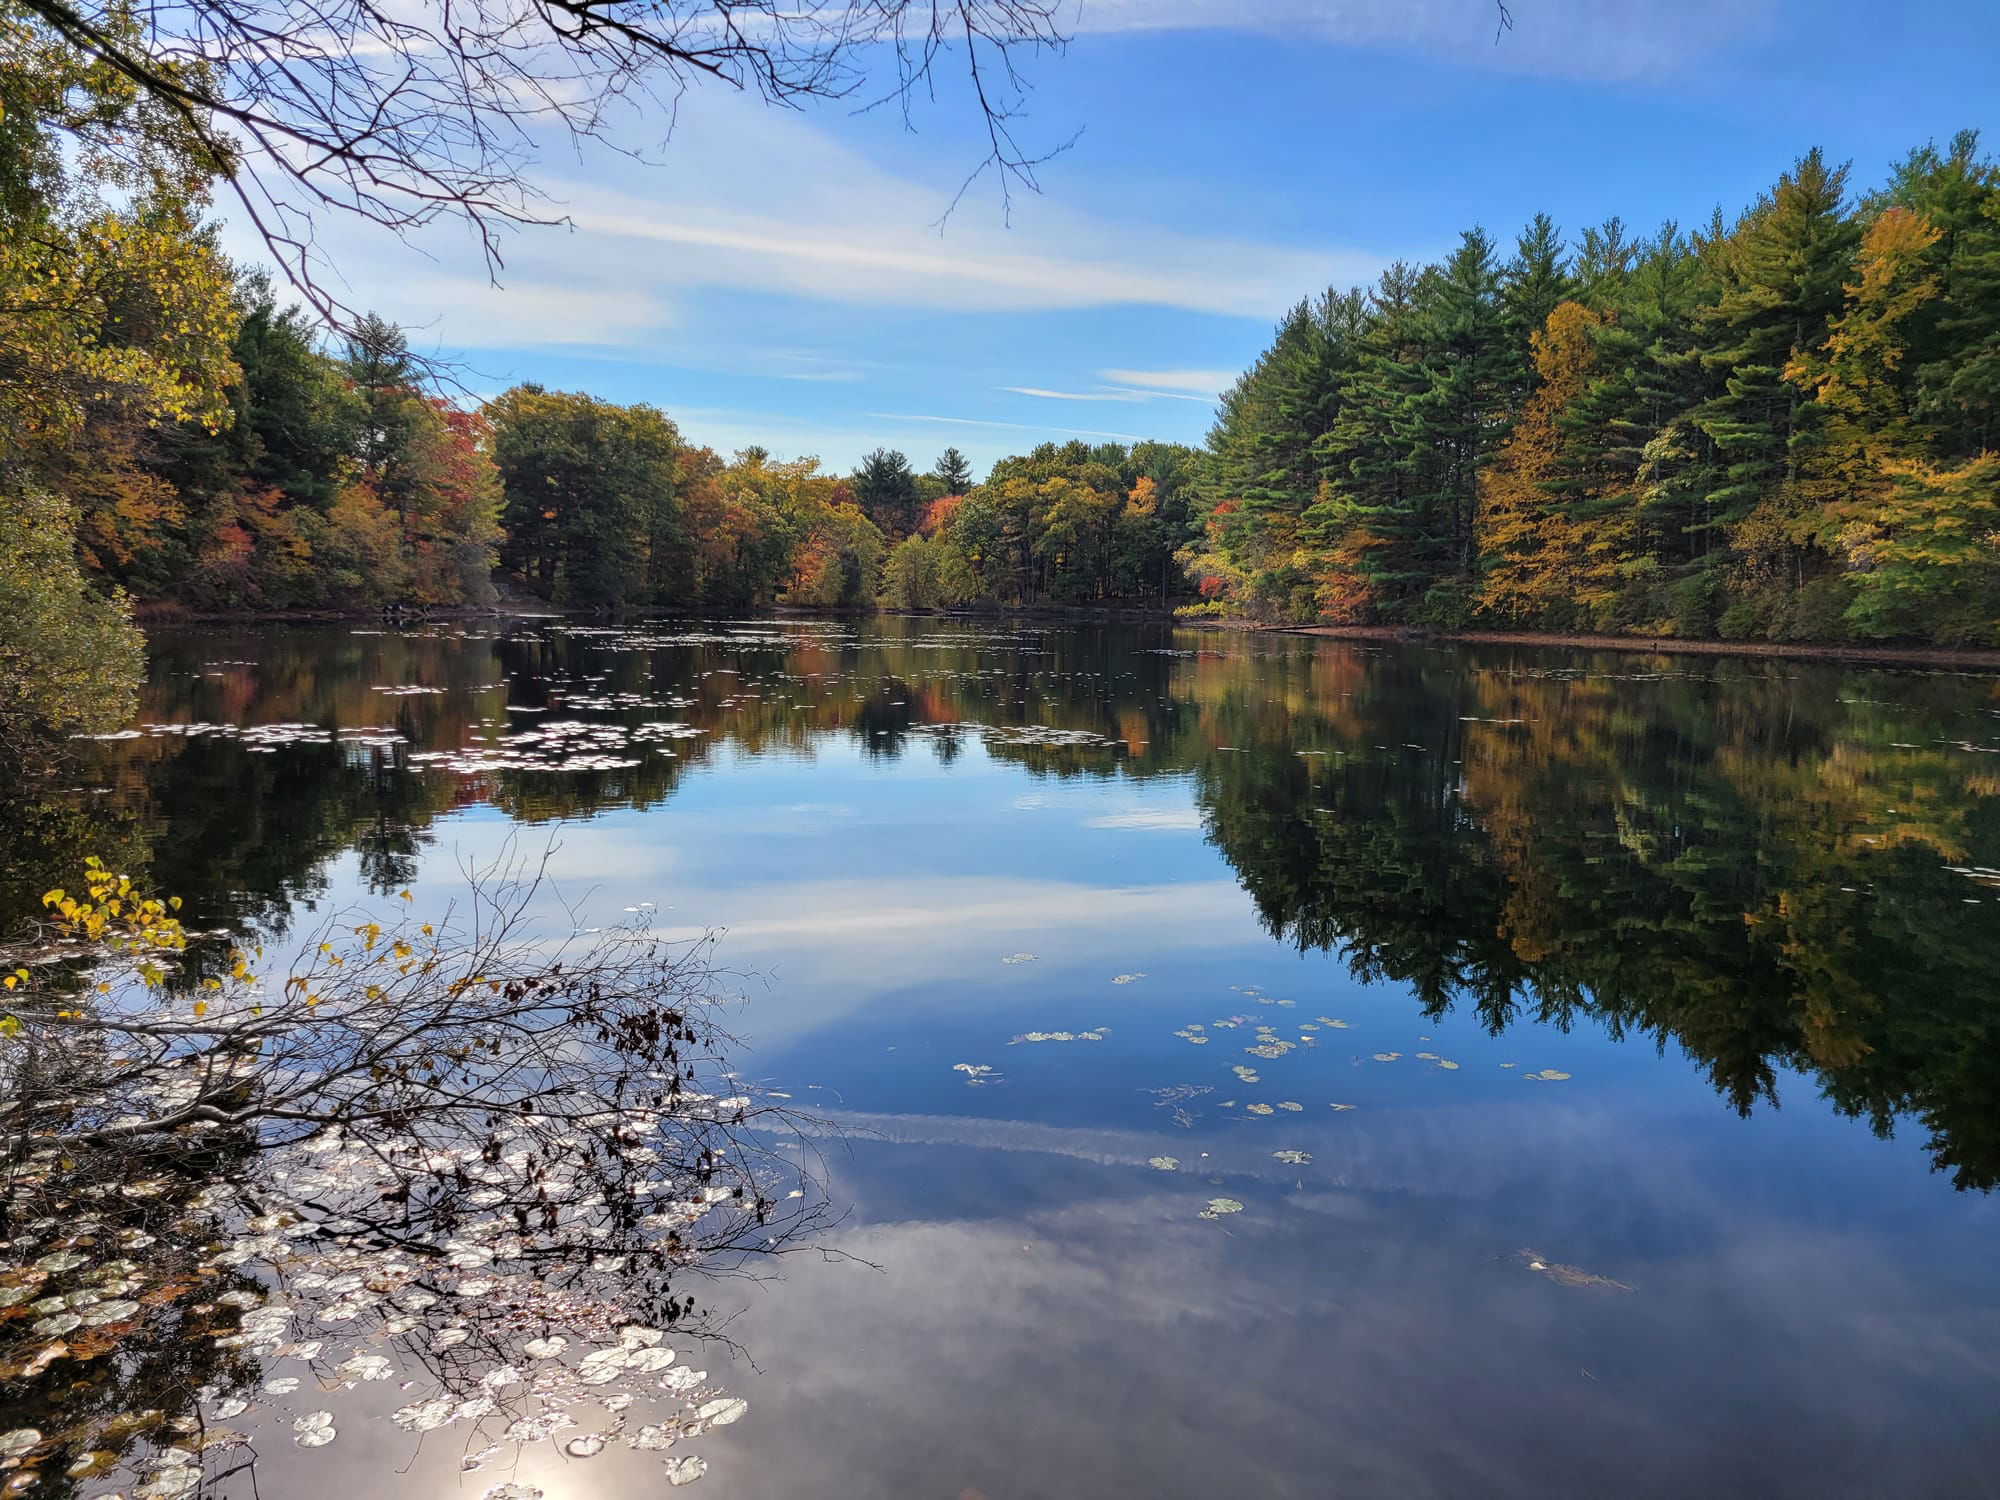 Rocky Woods Reservation Hiking Trails (Medfield, MA) - 11/1/20